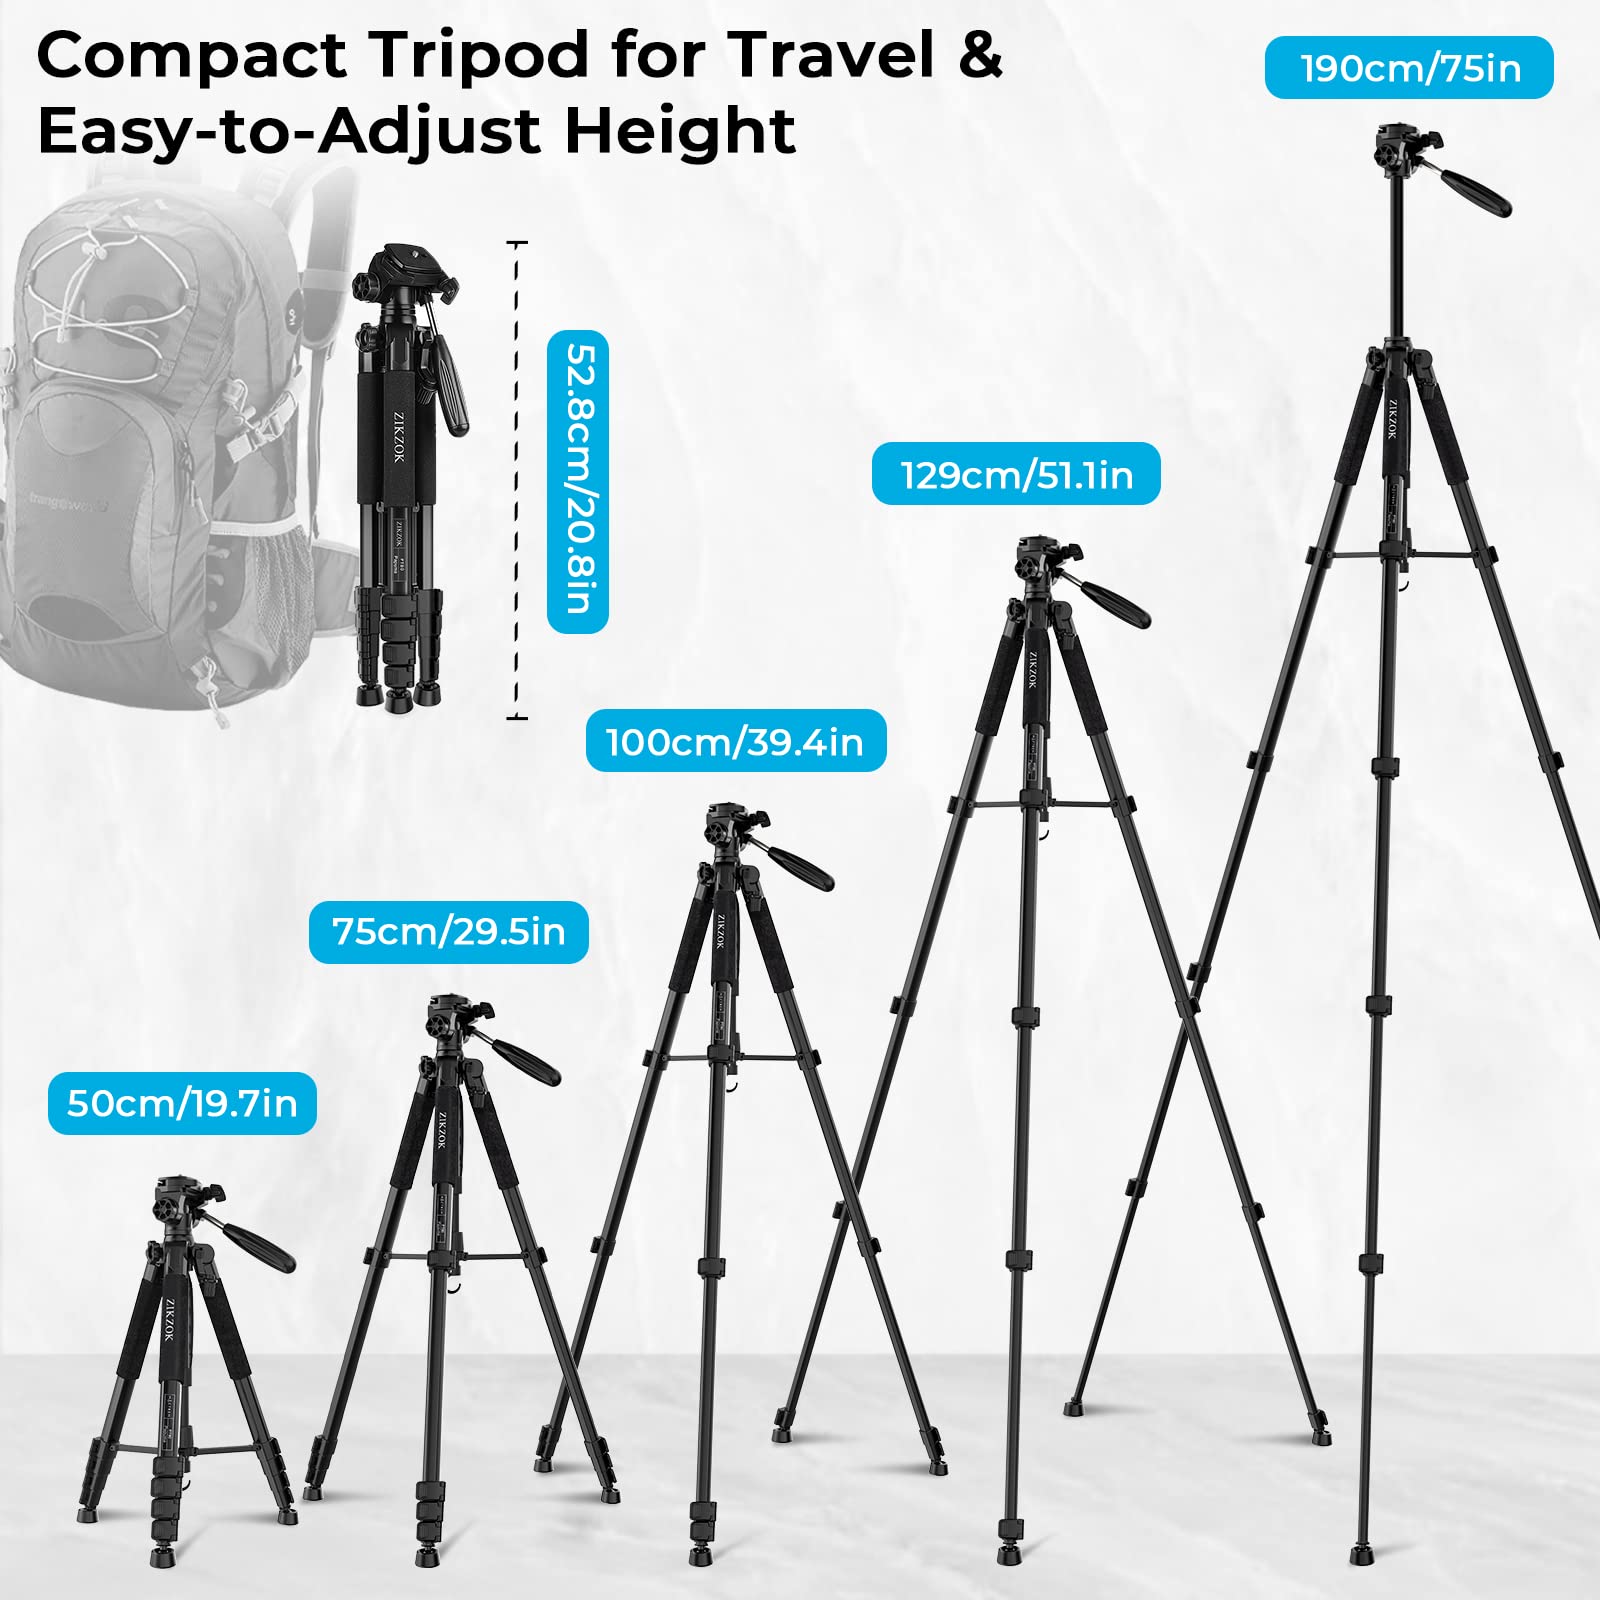 ZIKZOK 75 Inch Camera Tripod, Lightweight Travel Aluminum Cell Phone Video Tripod for DSLR/SLR/DV/GoPro/iPhone with Bag (Weight 2.8Lbs/Load 11Lbs)